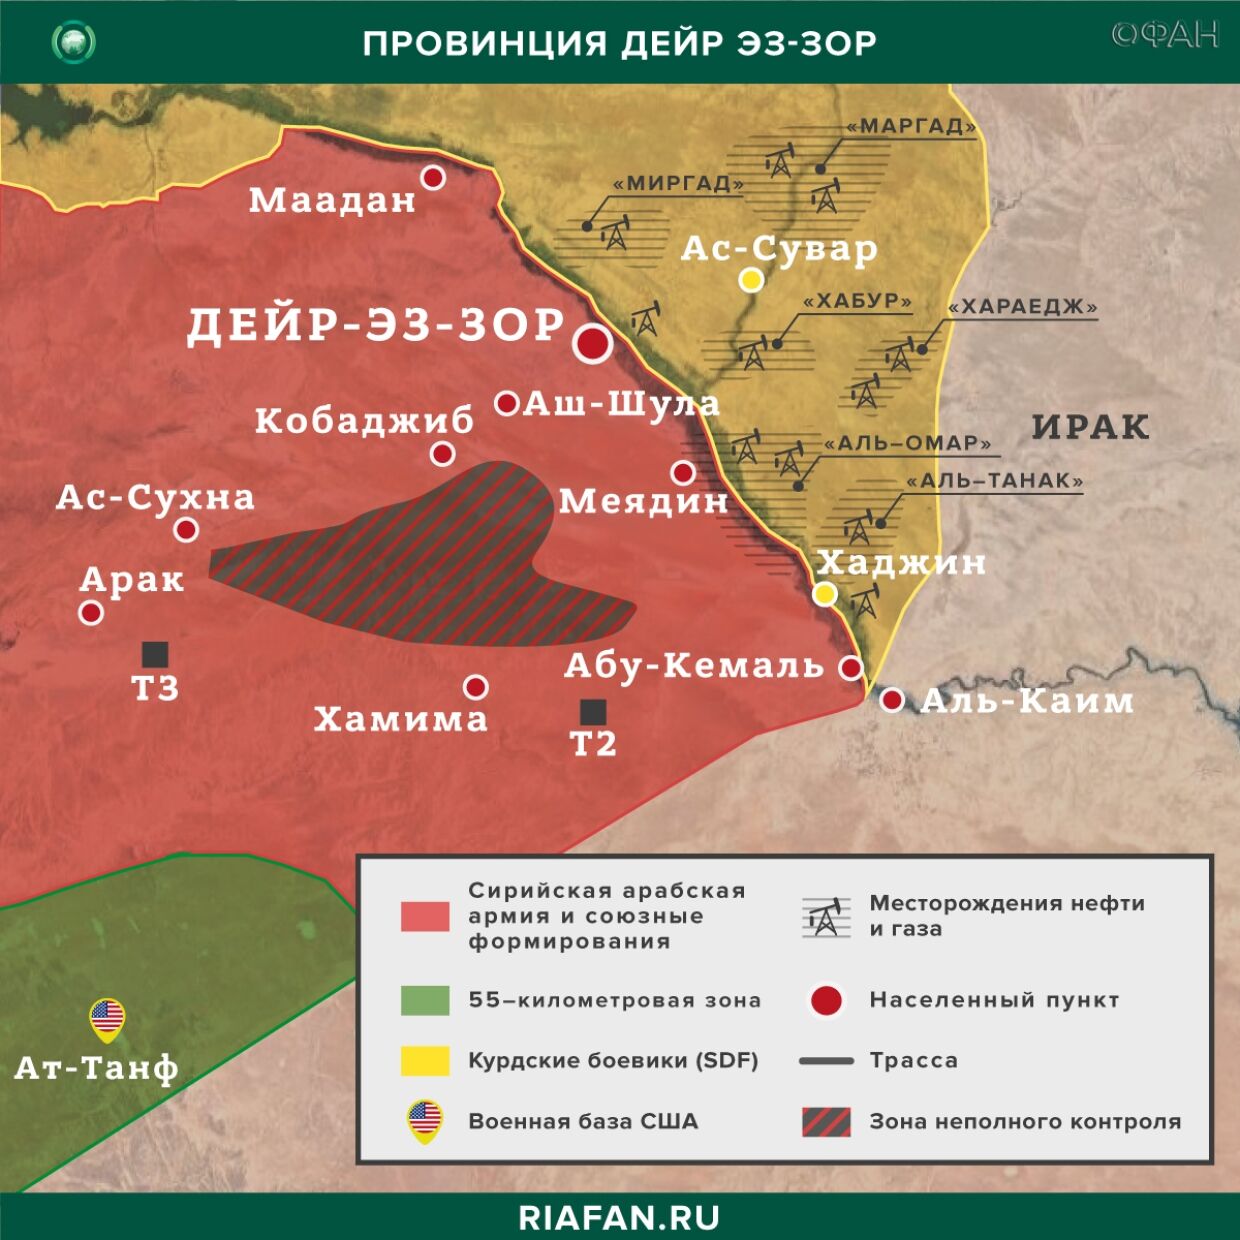 Syria the results of the day on 10 June 06.00: popular protests in SDF control zones, explosion on the route of the convoy of the Russian Federation in Aleppo